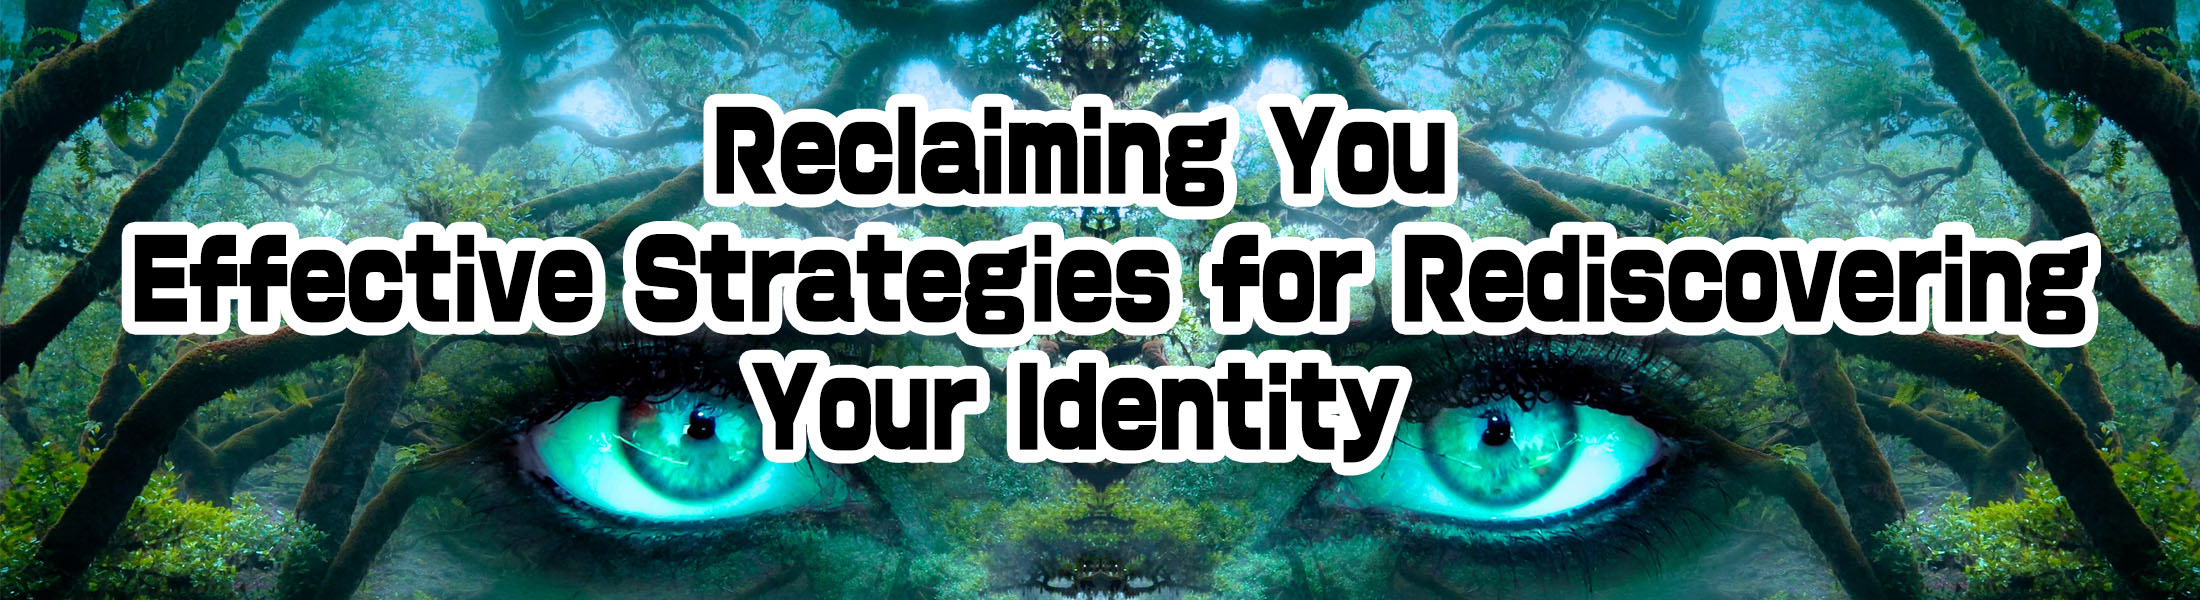 Reclaiming Your Sense of Security: Strategies to Feel Safe and Protected